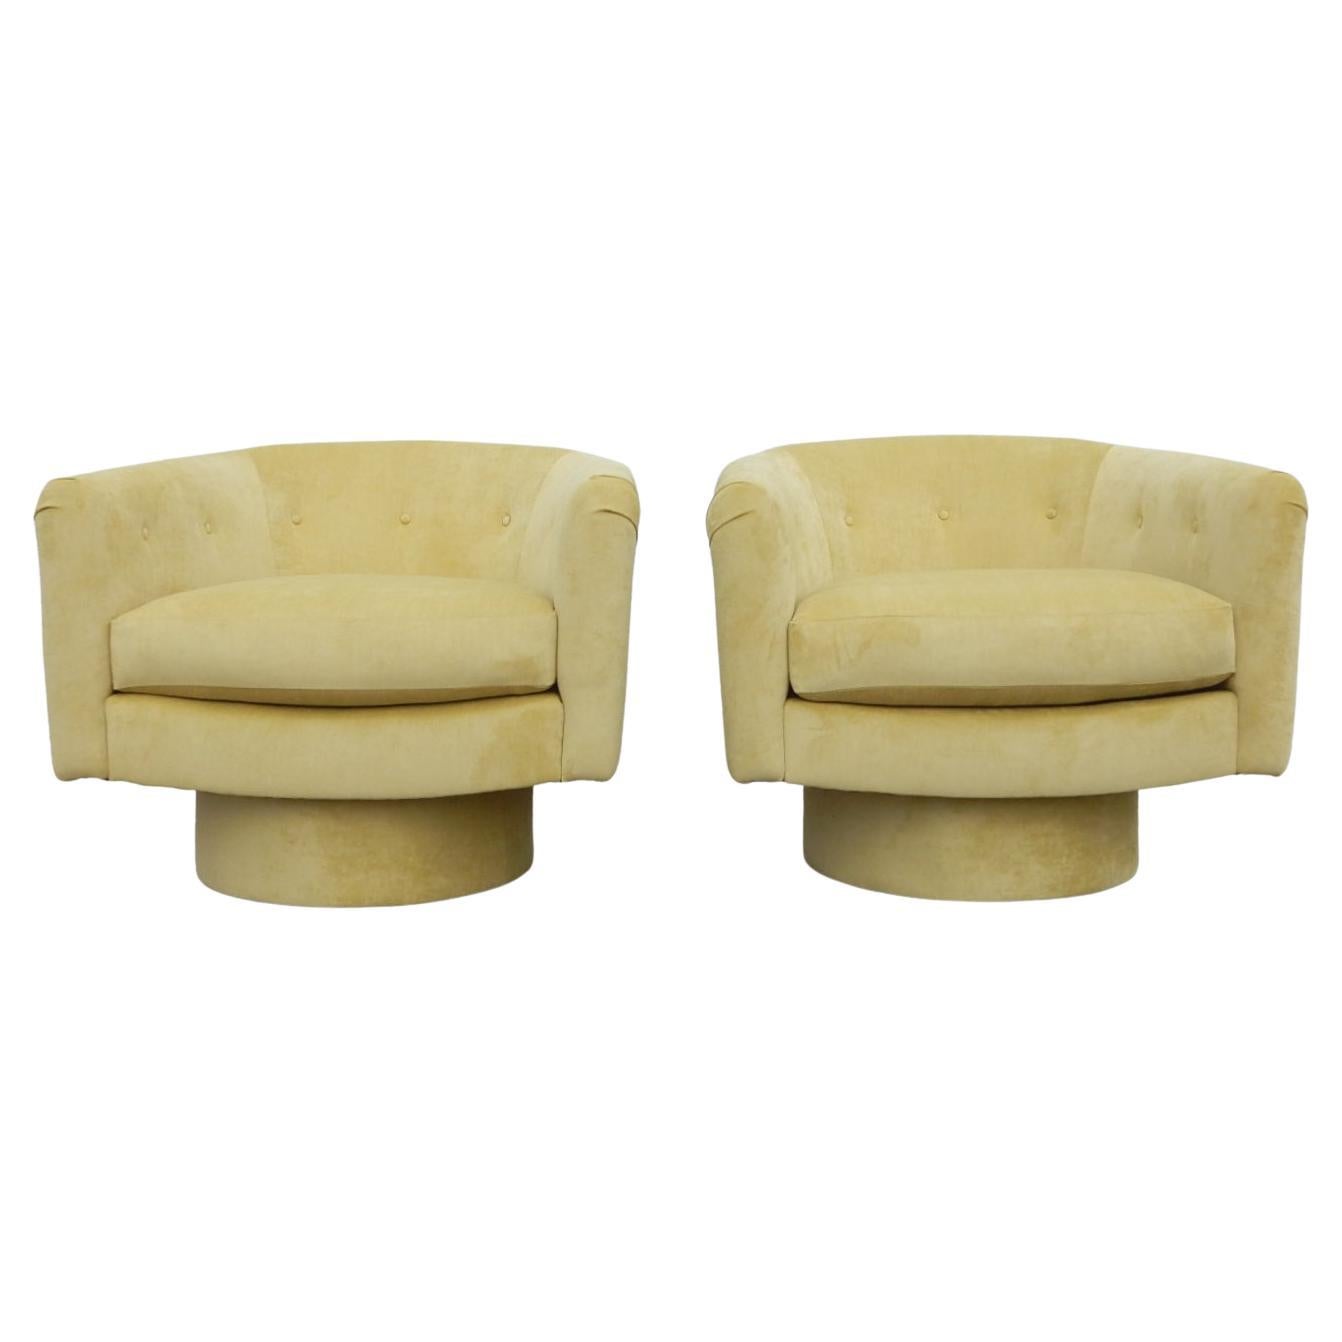 A pair of petite swivel lounge chairs designed in the style of Milo Baughman.
We just had them professionally reupholstered in a canary yellow velvet.
Like new condition ready to be enjoyed on delivery.
 